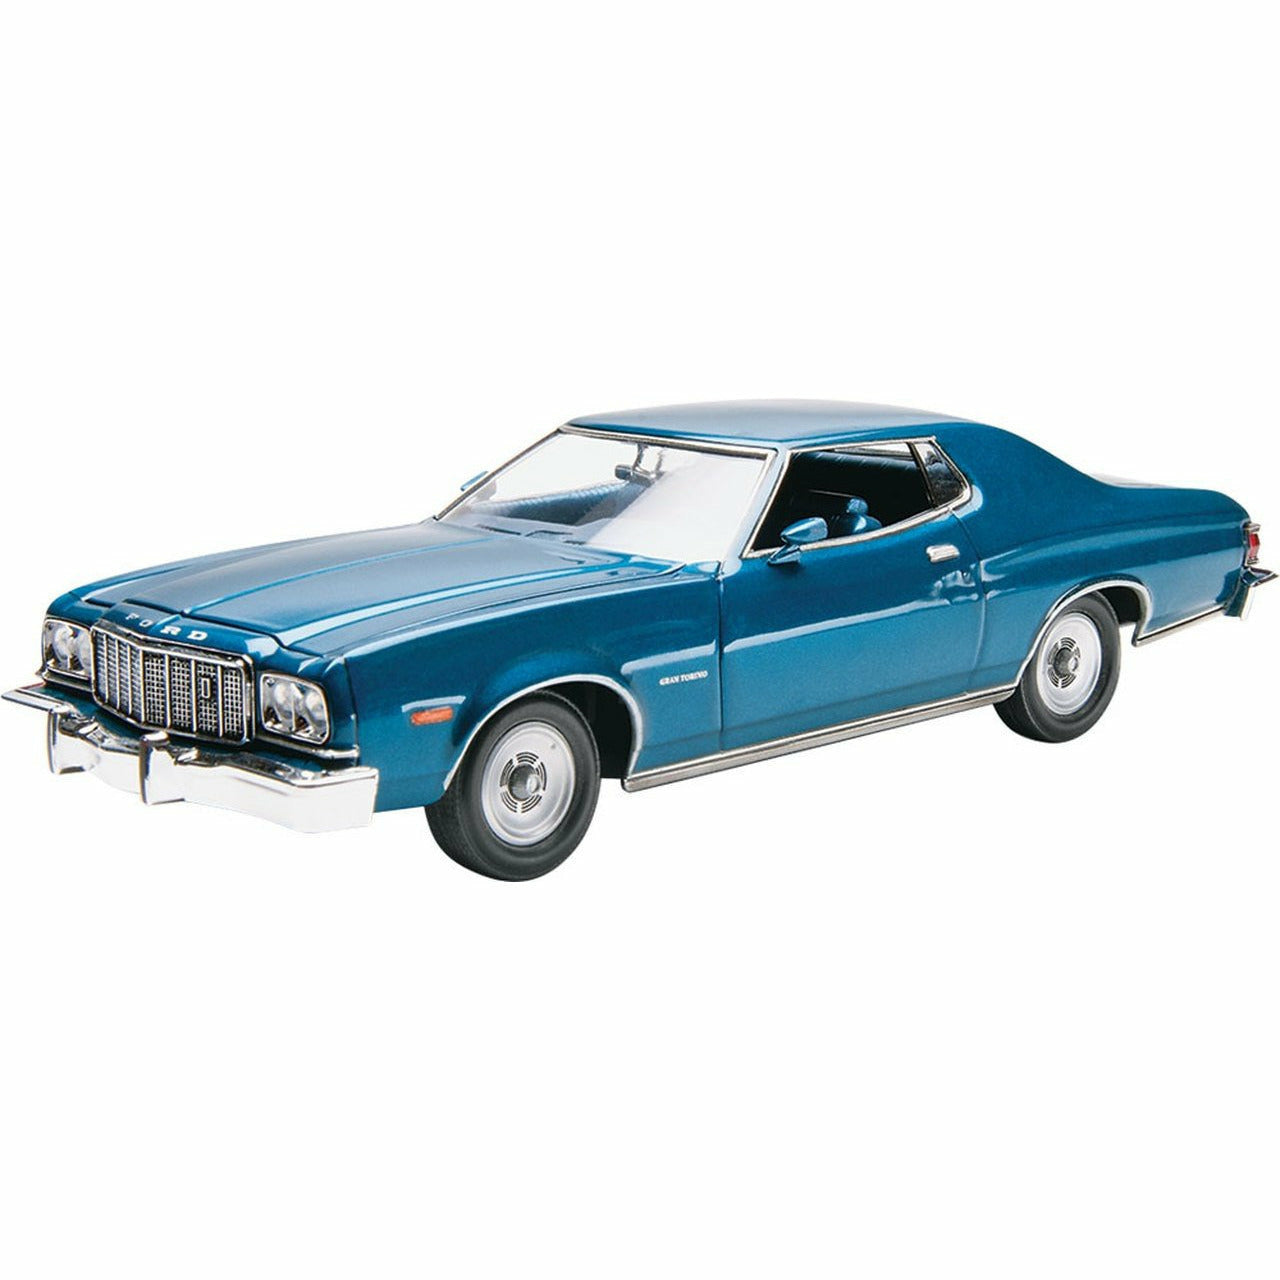 1976 Ford Gran Torino 1/25 by Revell